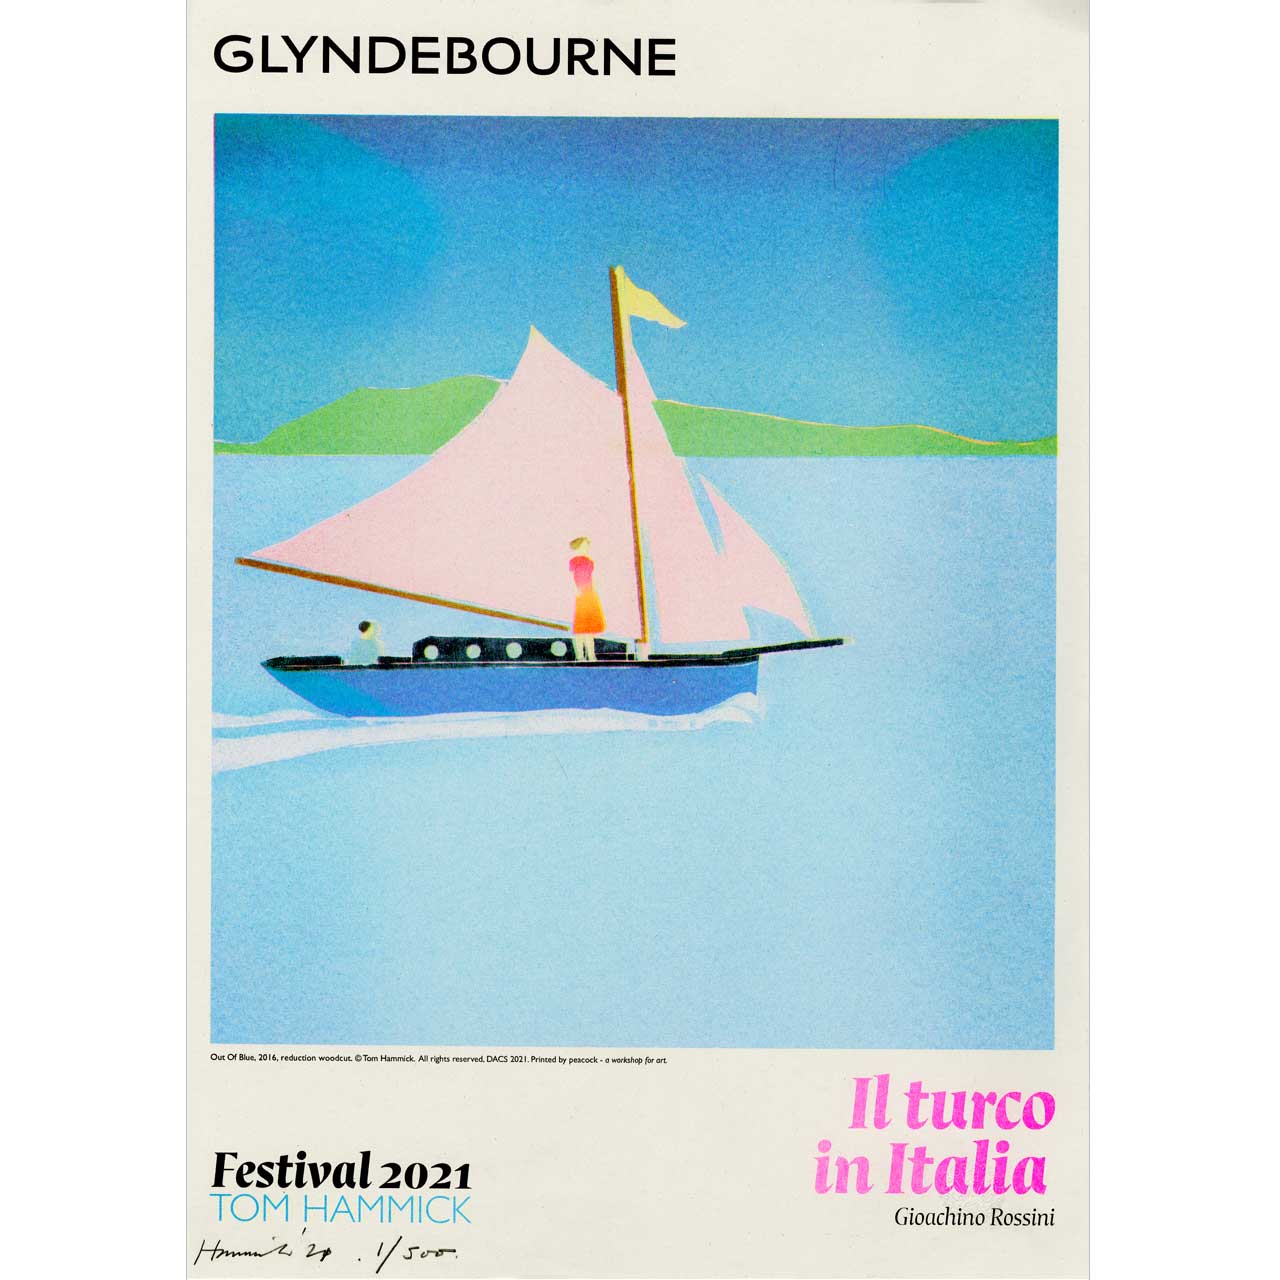 Glyndebourne 'Il turco in Italia' Poster 2021 by Tom Hammick 